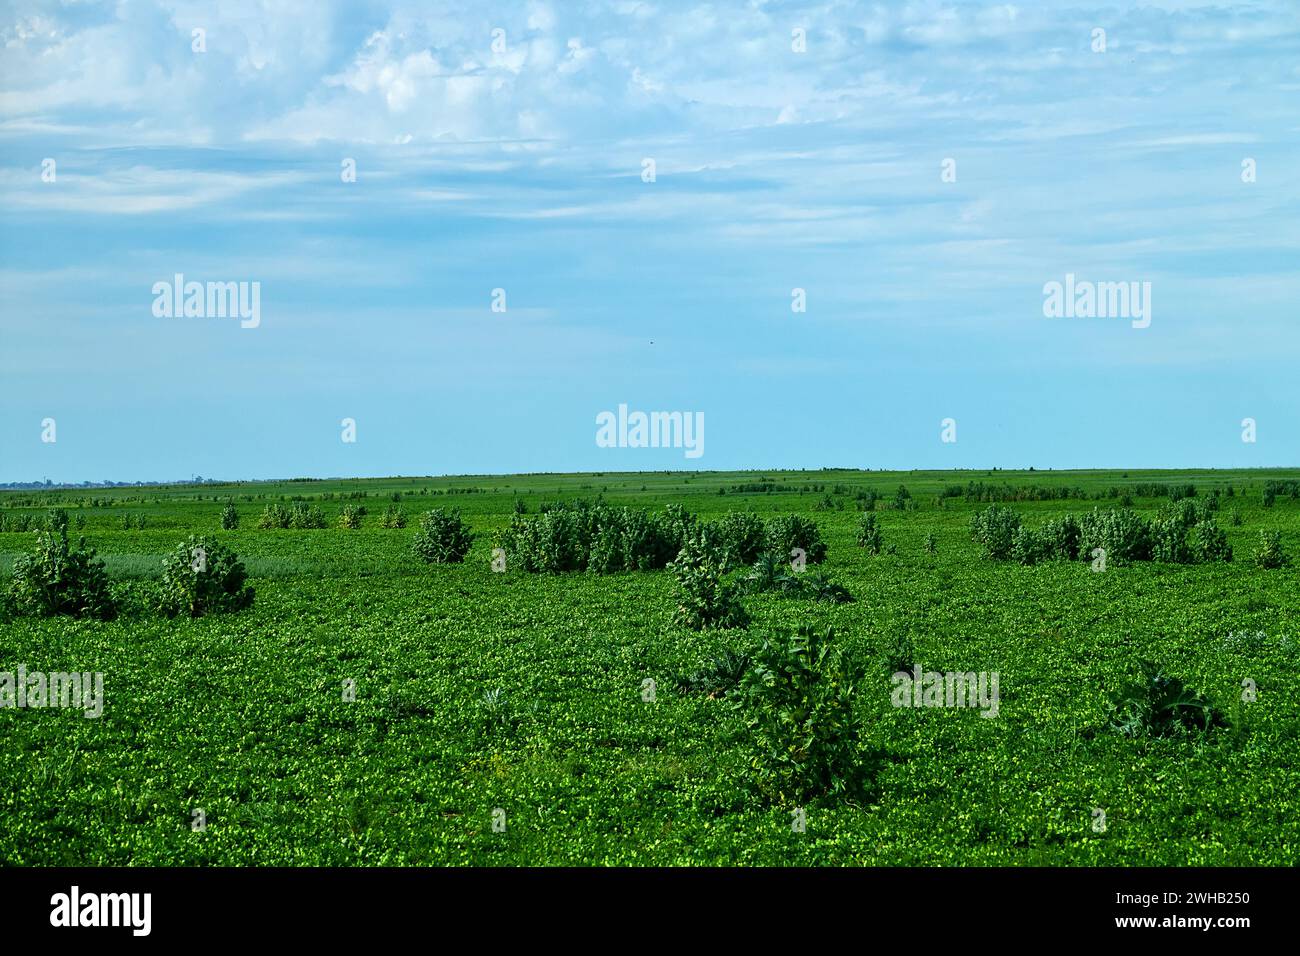 Field, new deposit with black henbane bushes, rapidly spreading weed with henbane bushes Stock Photo